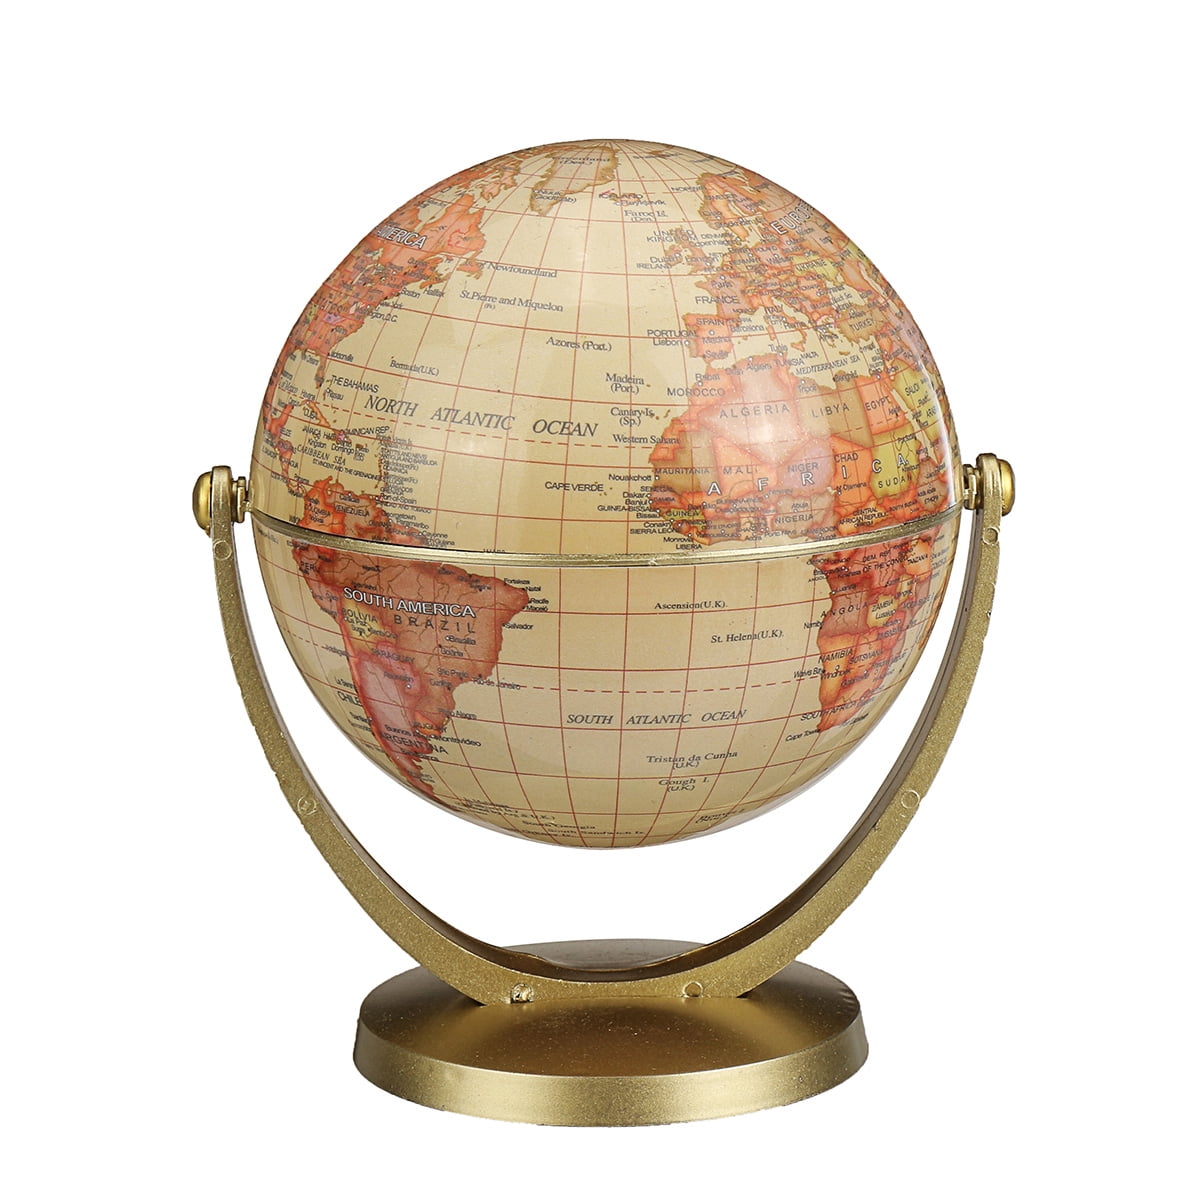 New Decorative Antique Style World Globe Tabletop Rotating Map 